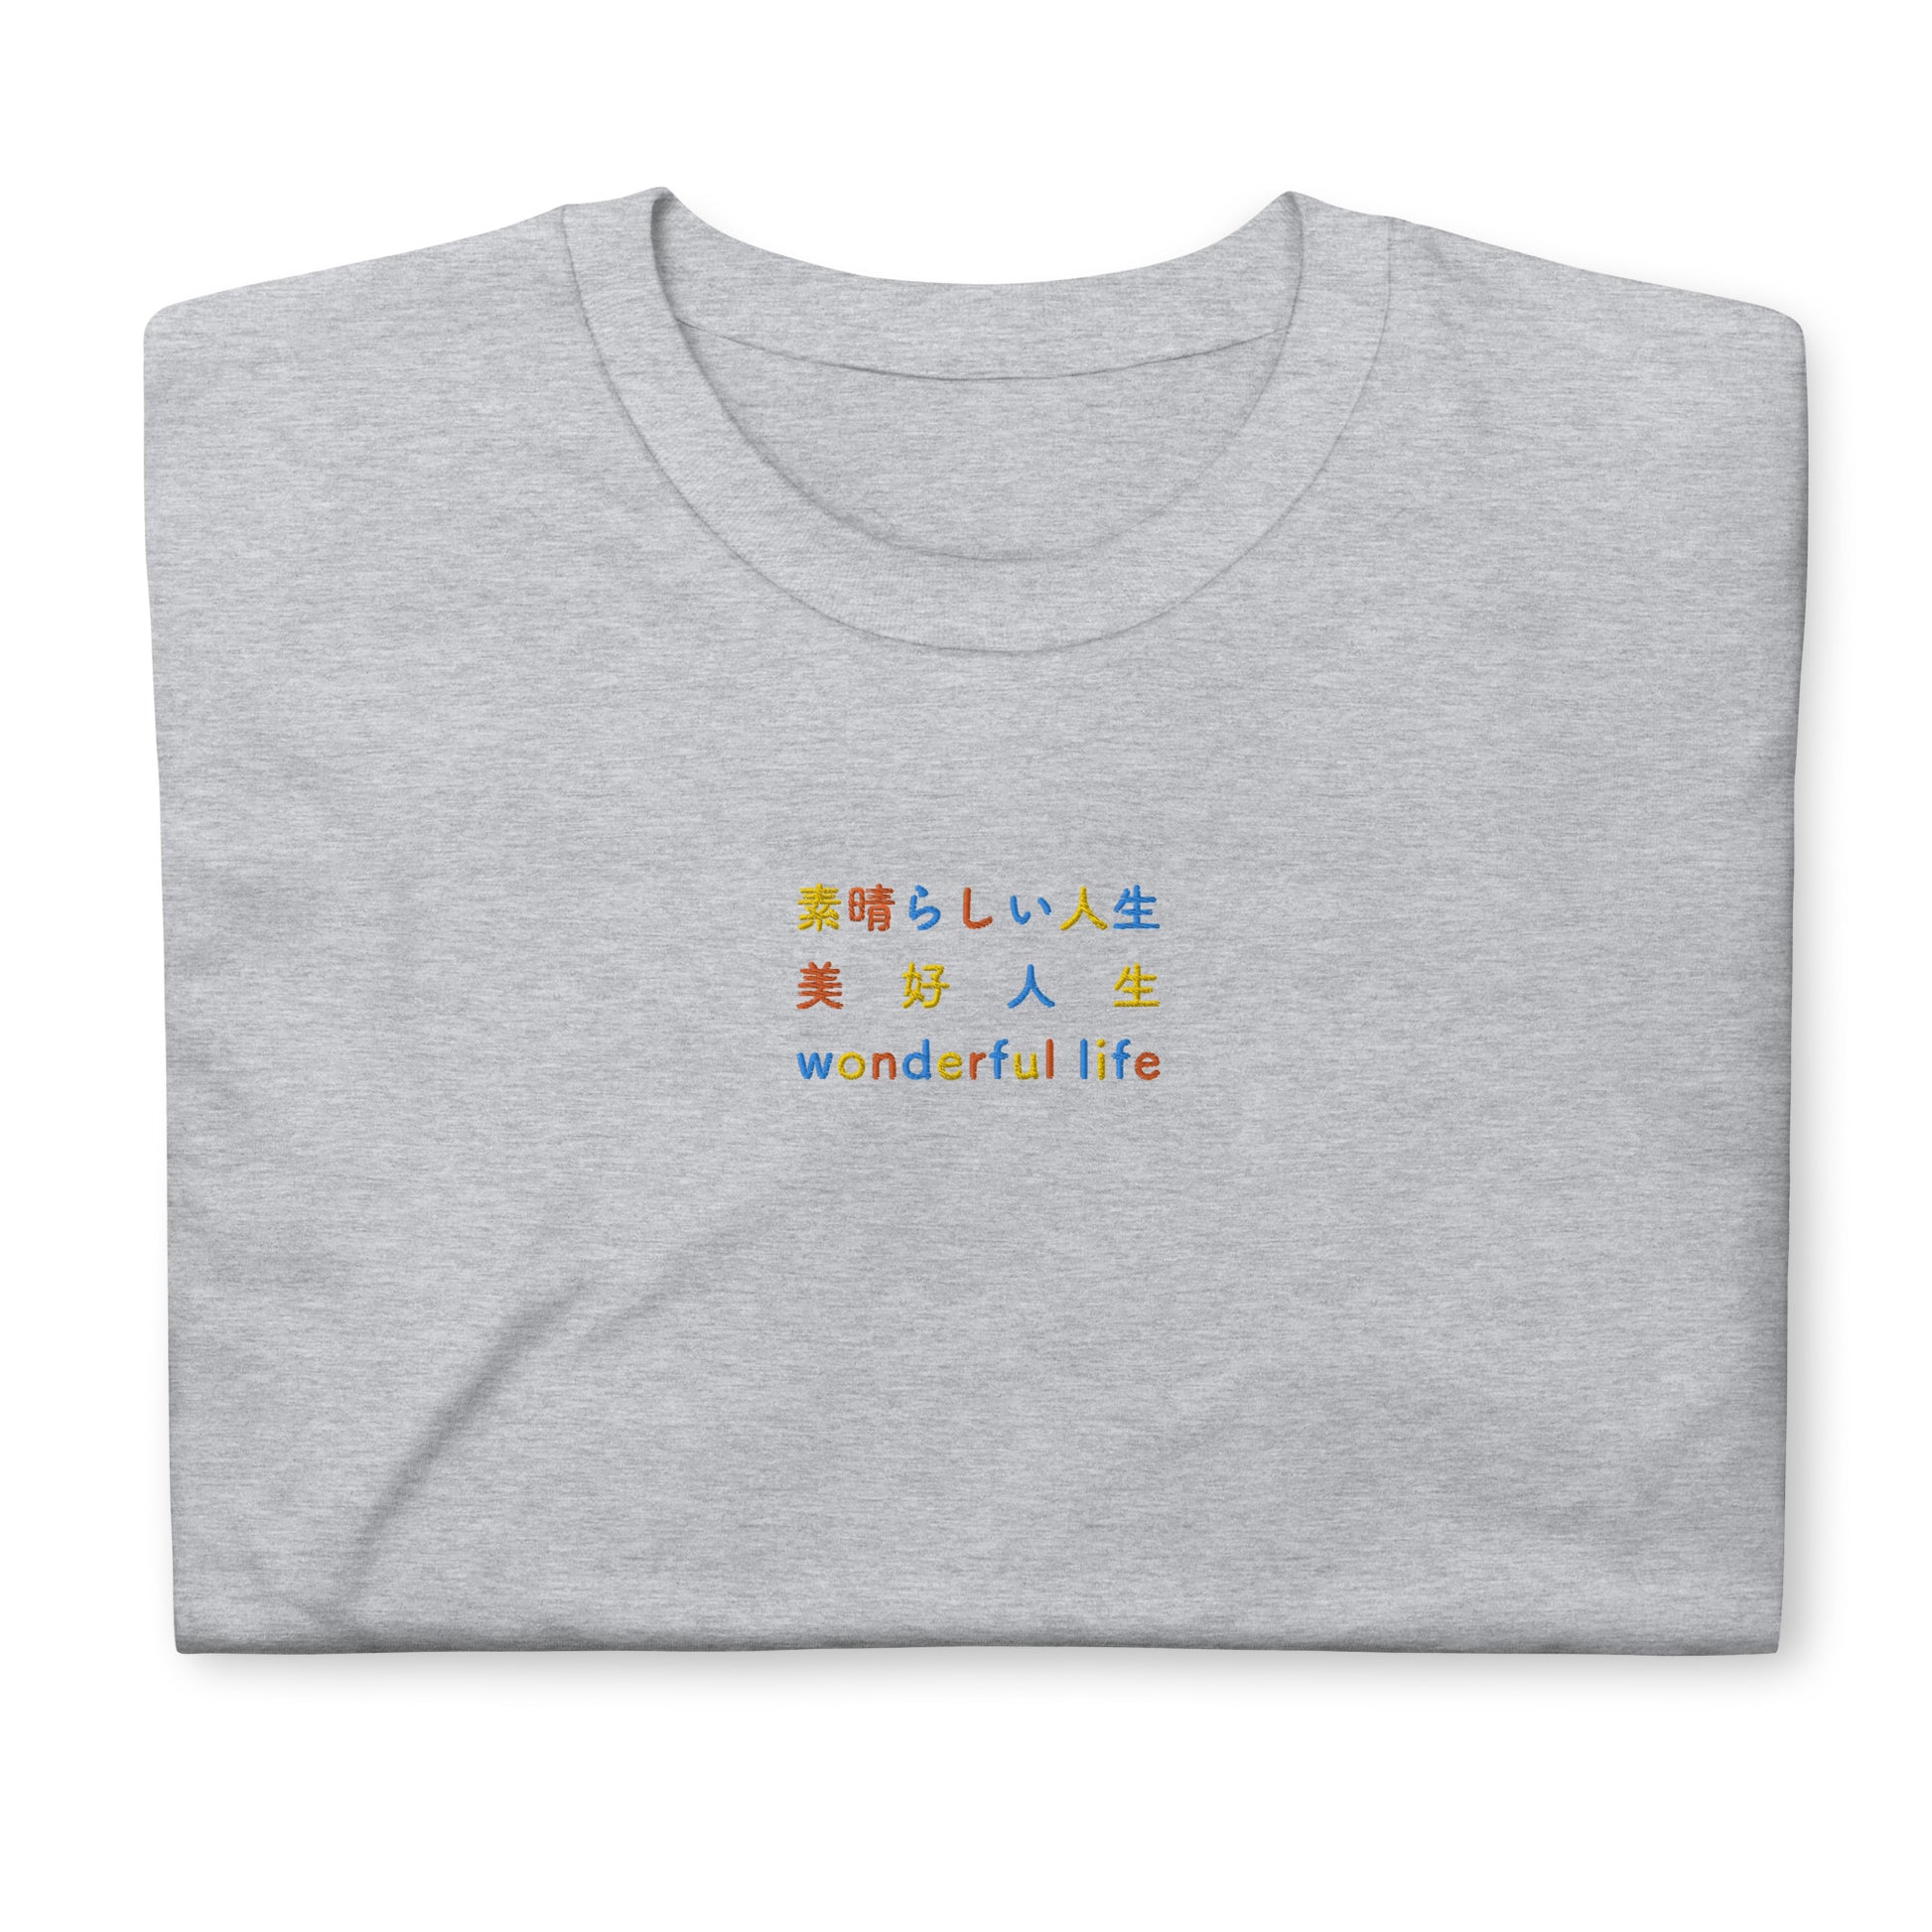 Light Gray High Quality Tee - Front Design with Yellow, Orange and Blue Embroidery "Wonderful Life" in Japanese,Chinese and English